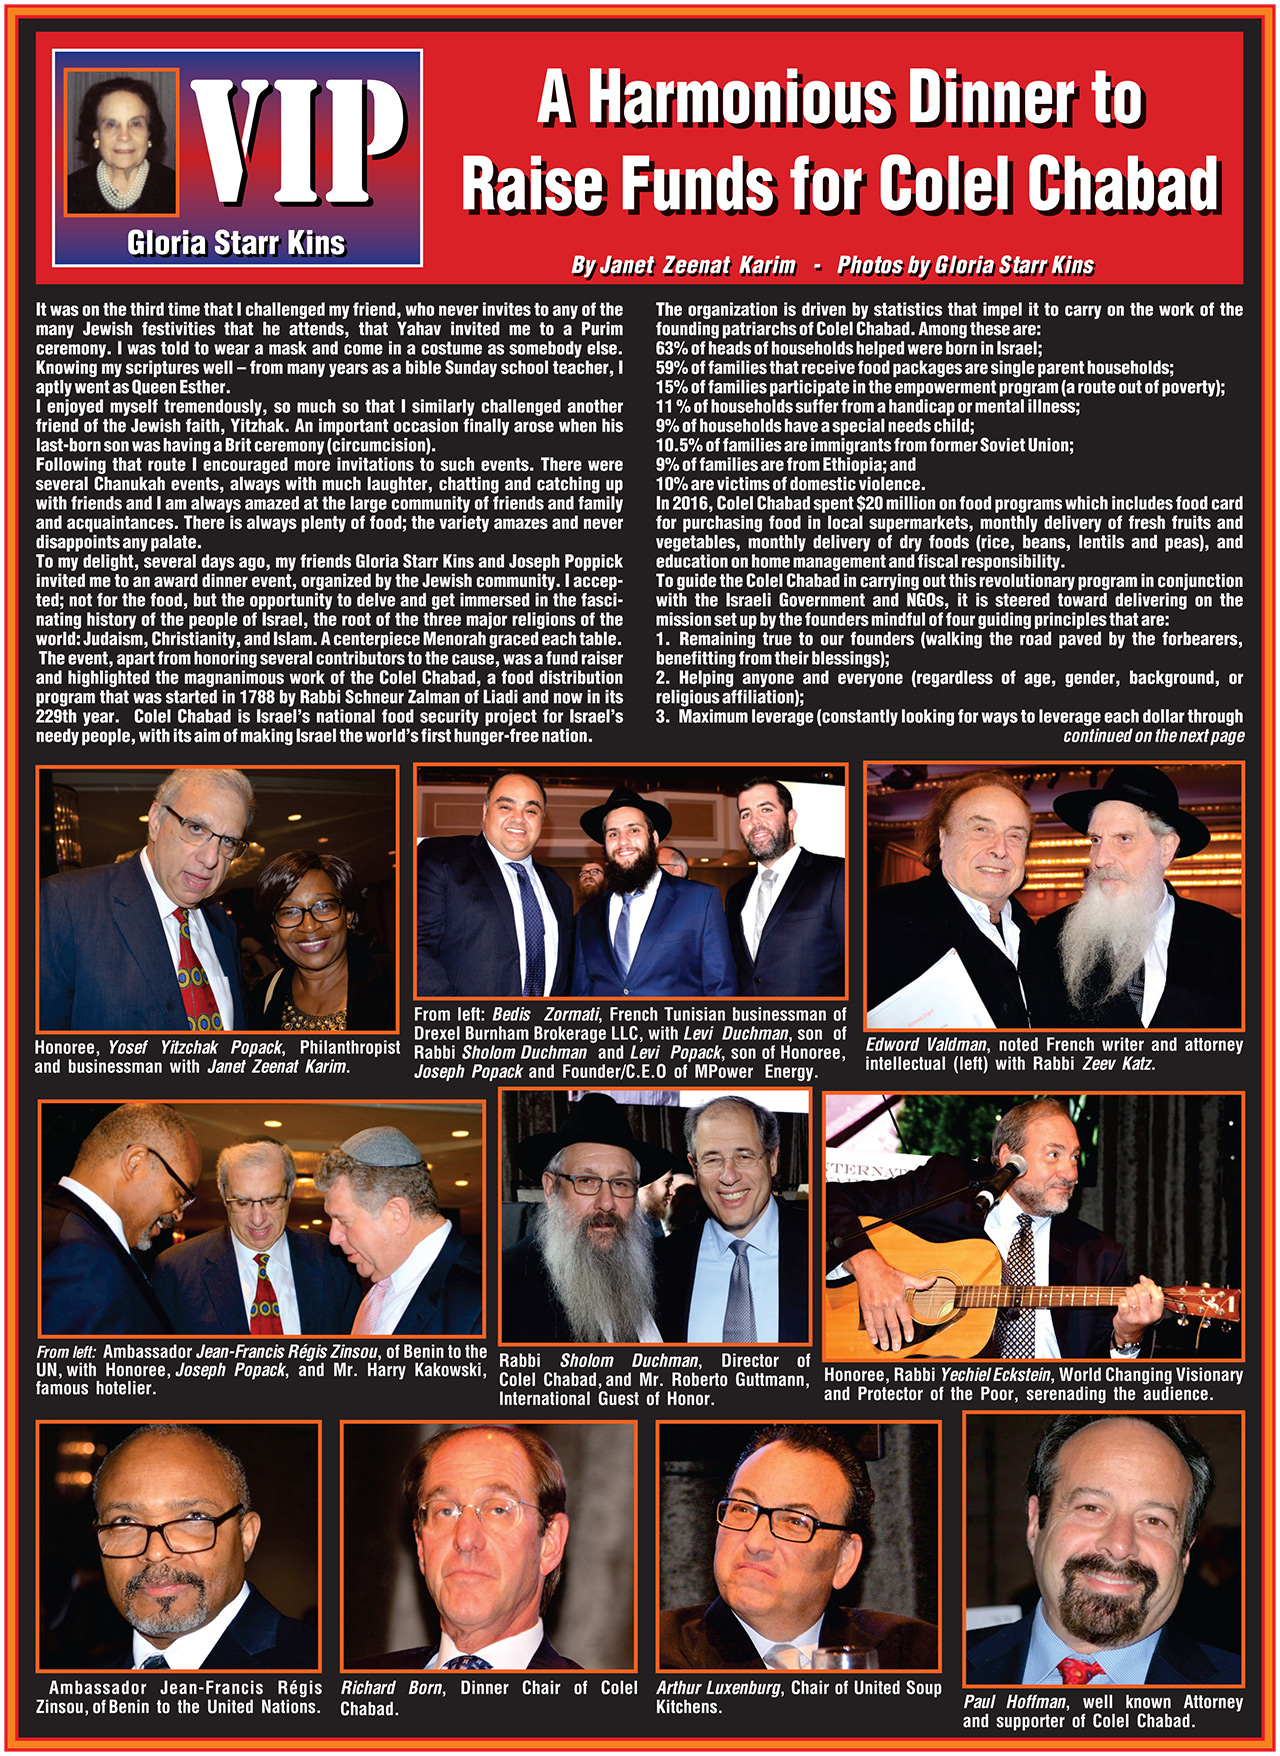 A Harmonious Dinner to Raise Funds for Colel Chabad